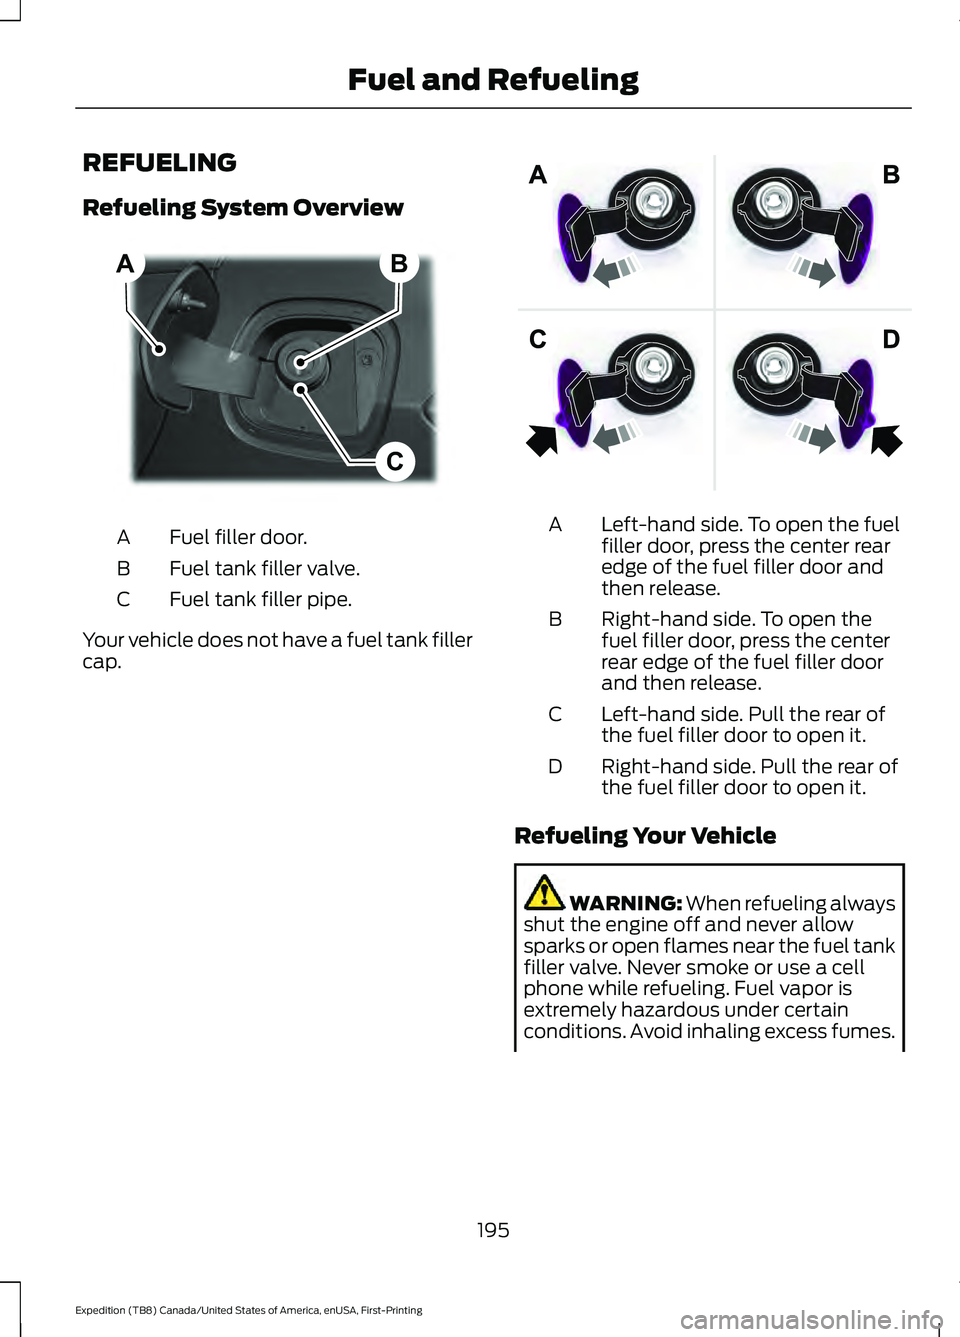 FORD EXPEDITION 2021  Owners Manual REFUELING
Refueling System Overview
Fuel filler door.
A
Fuel tank filler valve.
B
Fuel tank filler pipe.
C
Your vehicle does not have a fuel tank filler
cap. Left-hand side. To open the fuel
filler do